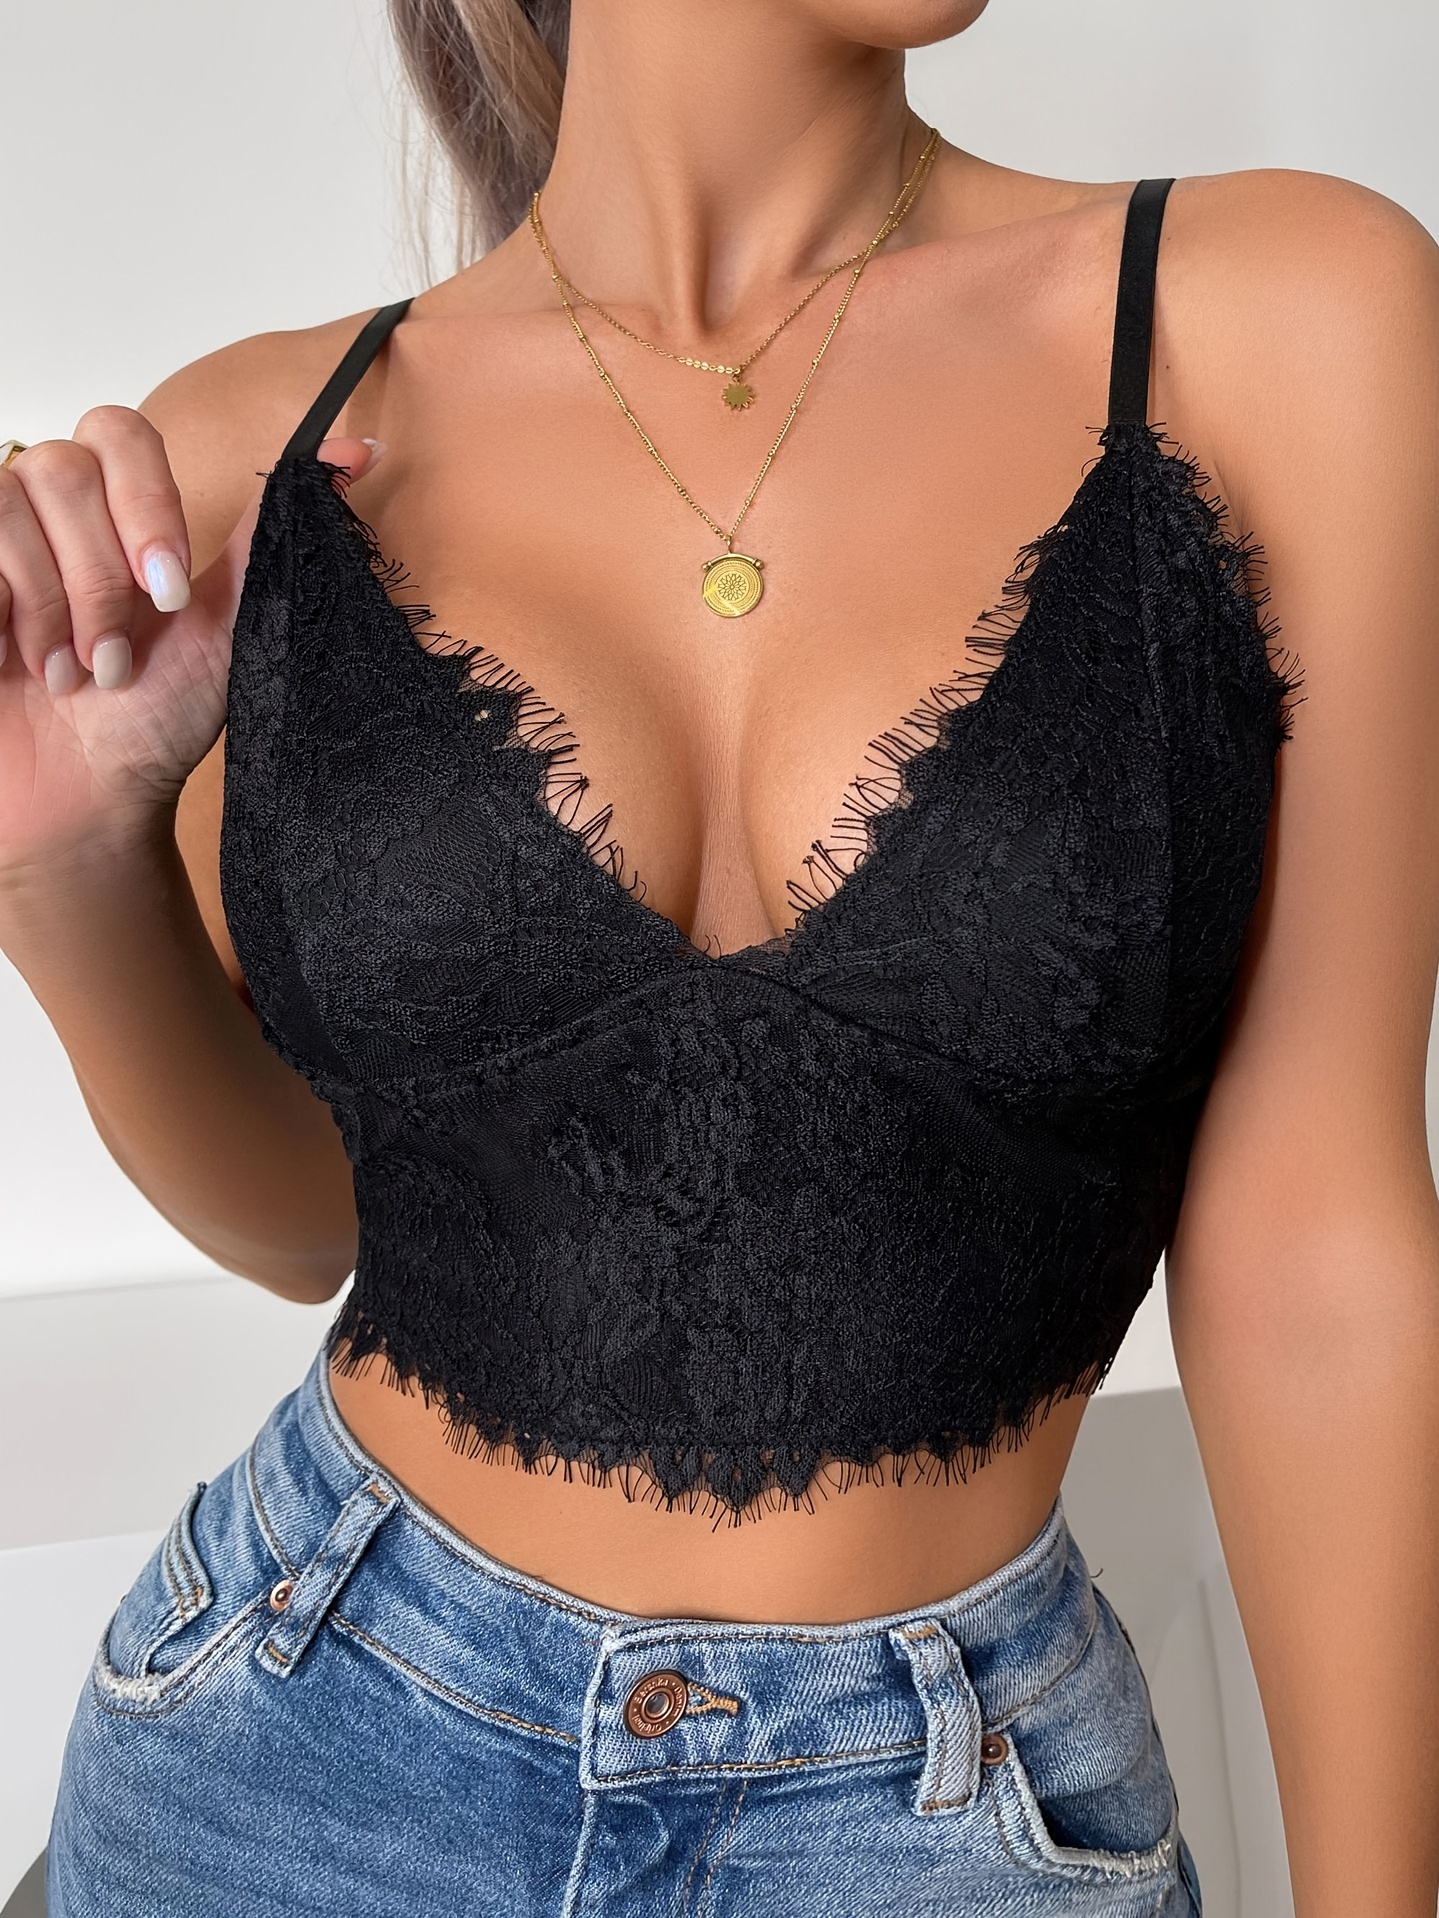 Womens Tank Top Lace Cami Very Sexy Black Low Cut Spaghetti Strap Camisole M